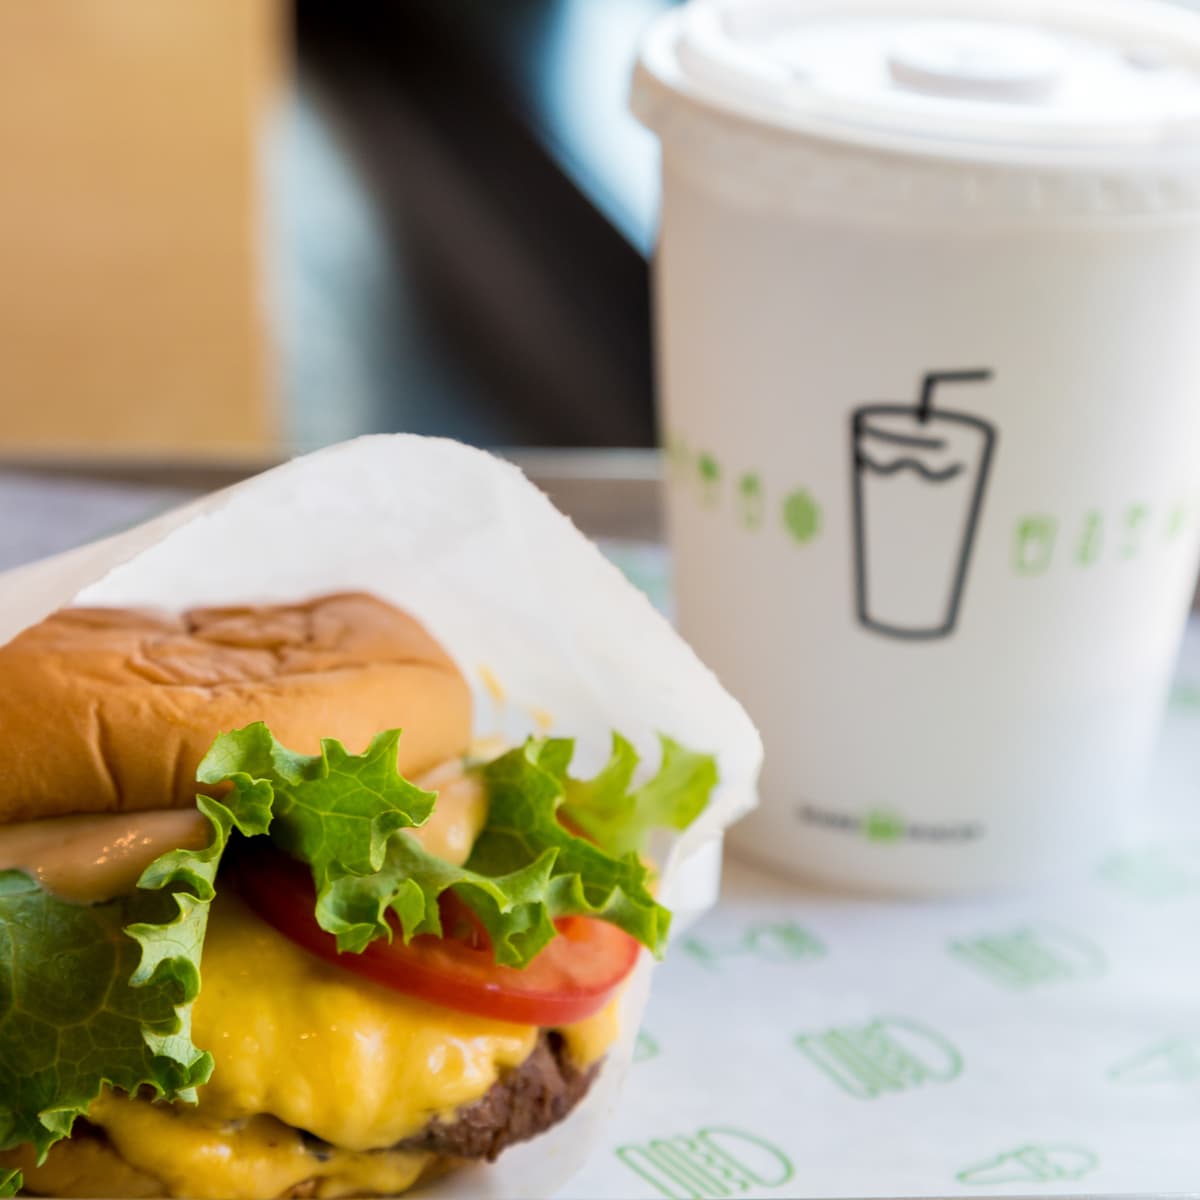 Shake Shack's Vegan Shakes and Veggie Burgers Just Launched at All 260 US  Locations